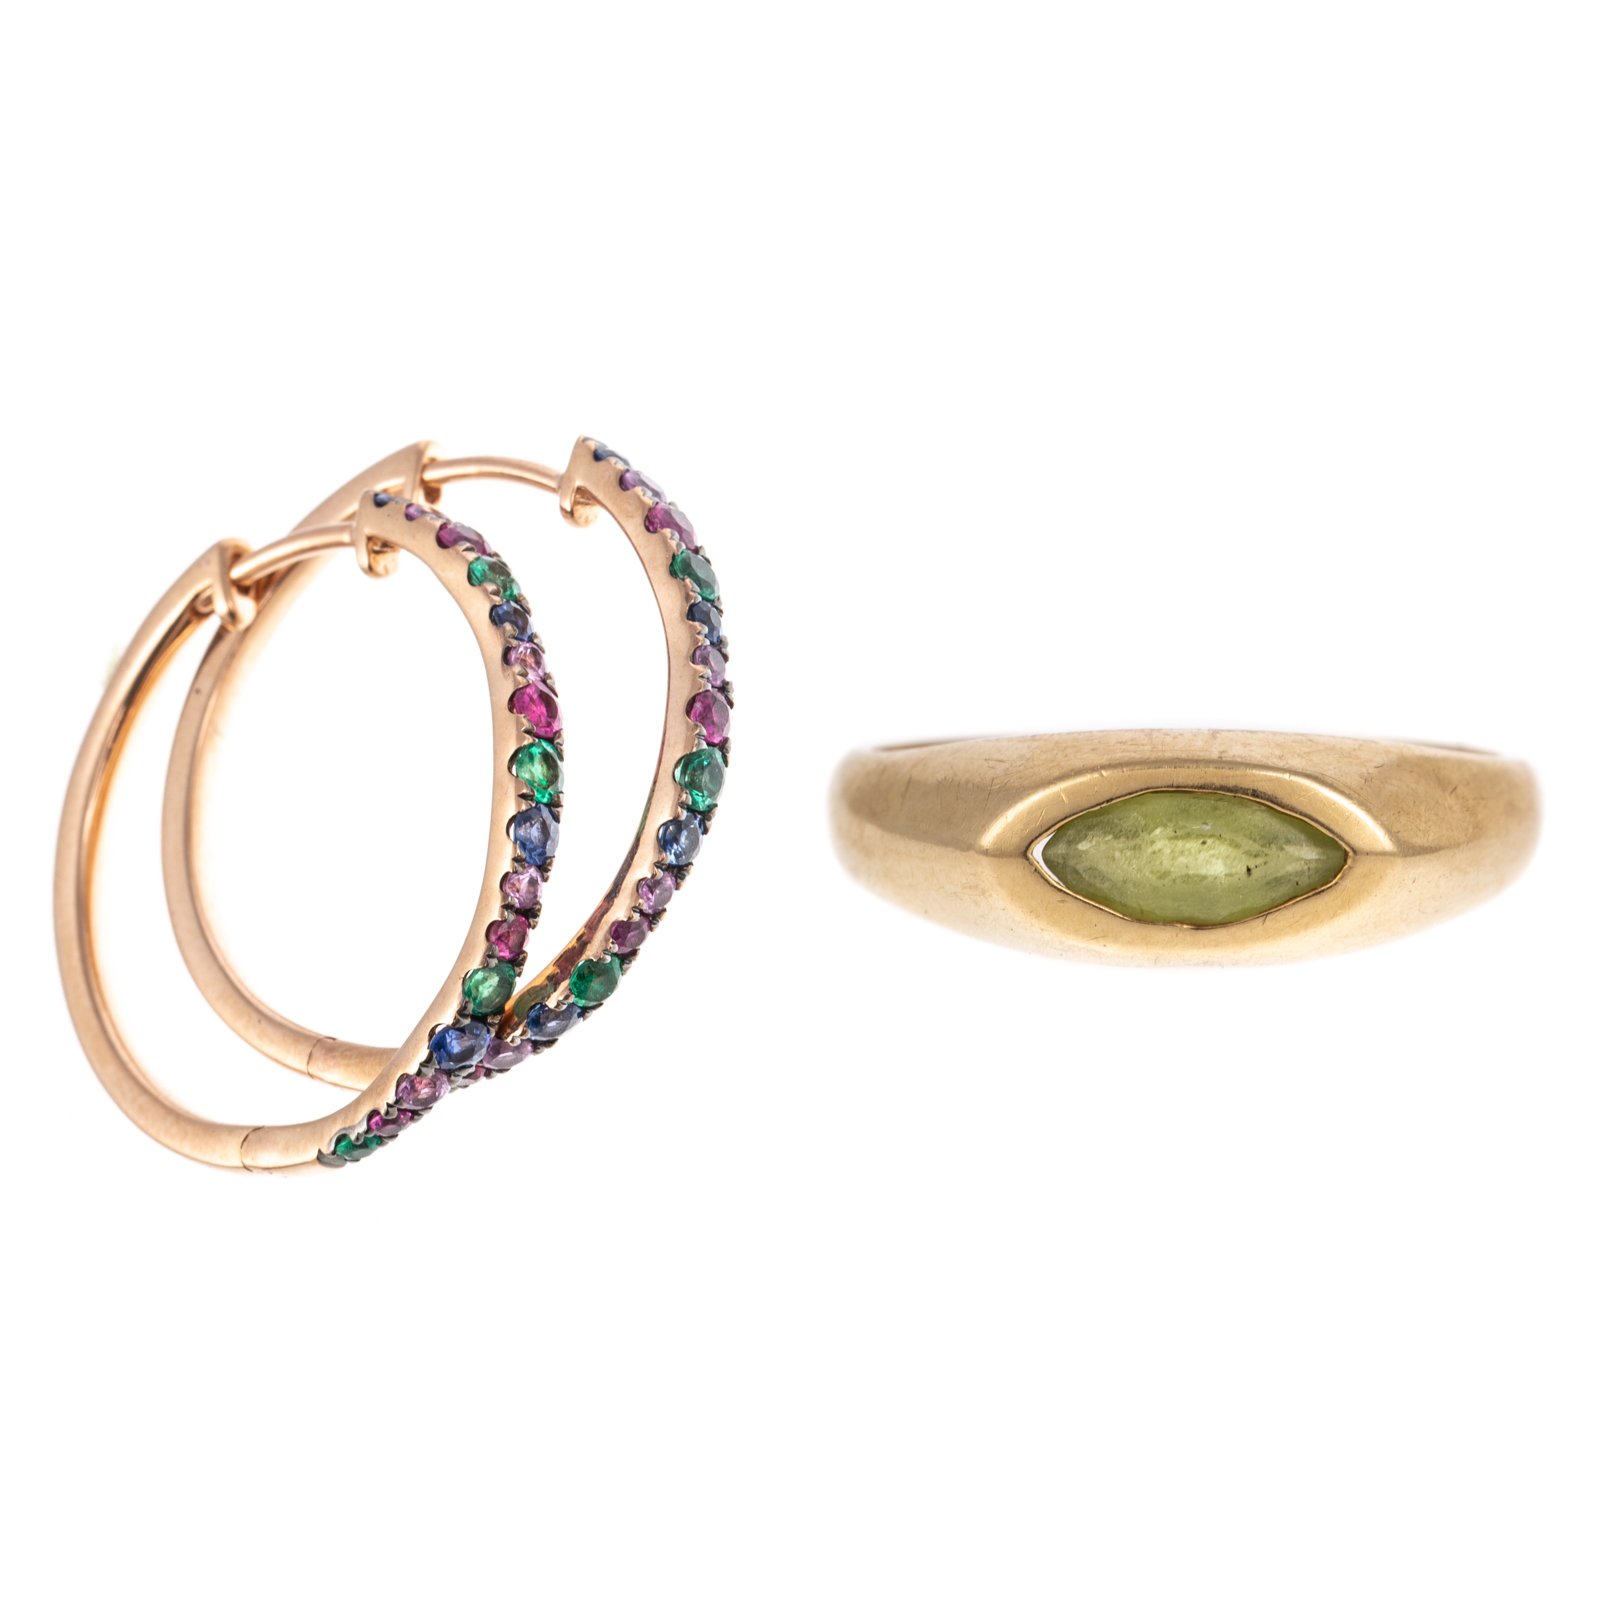 A PAIR OF LEVIAN HOOPS & TOM SOLOW